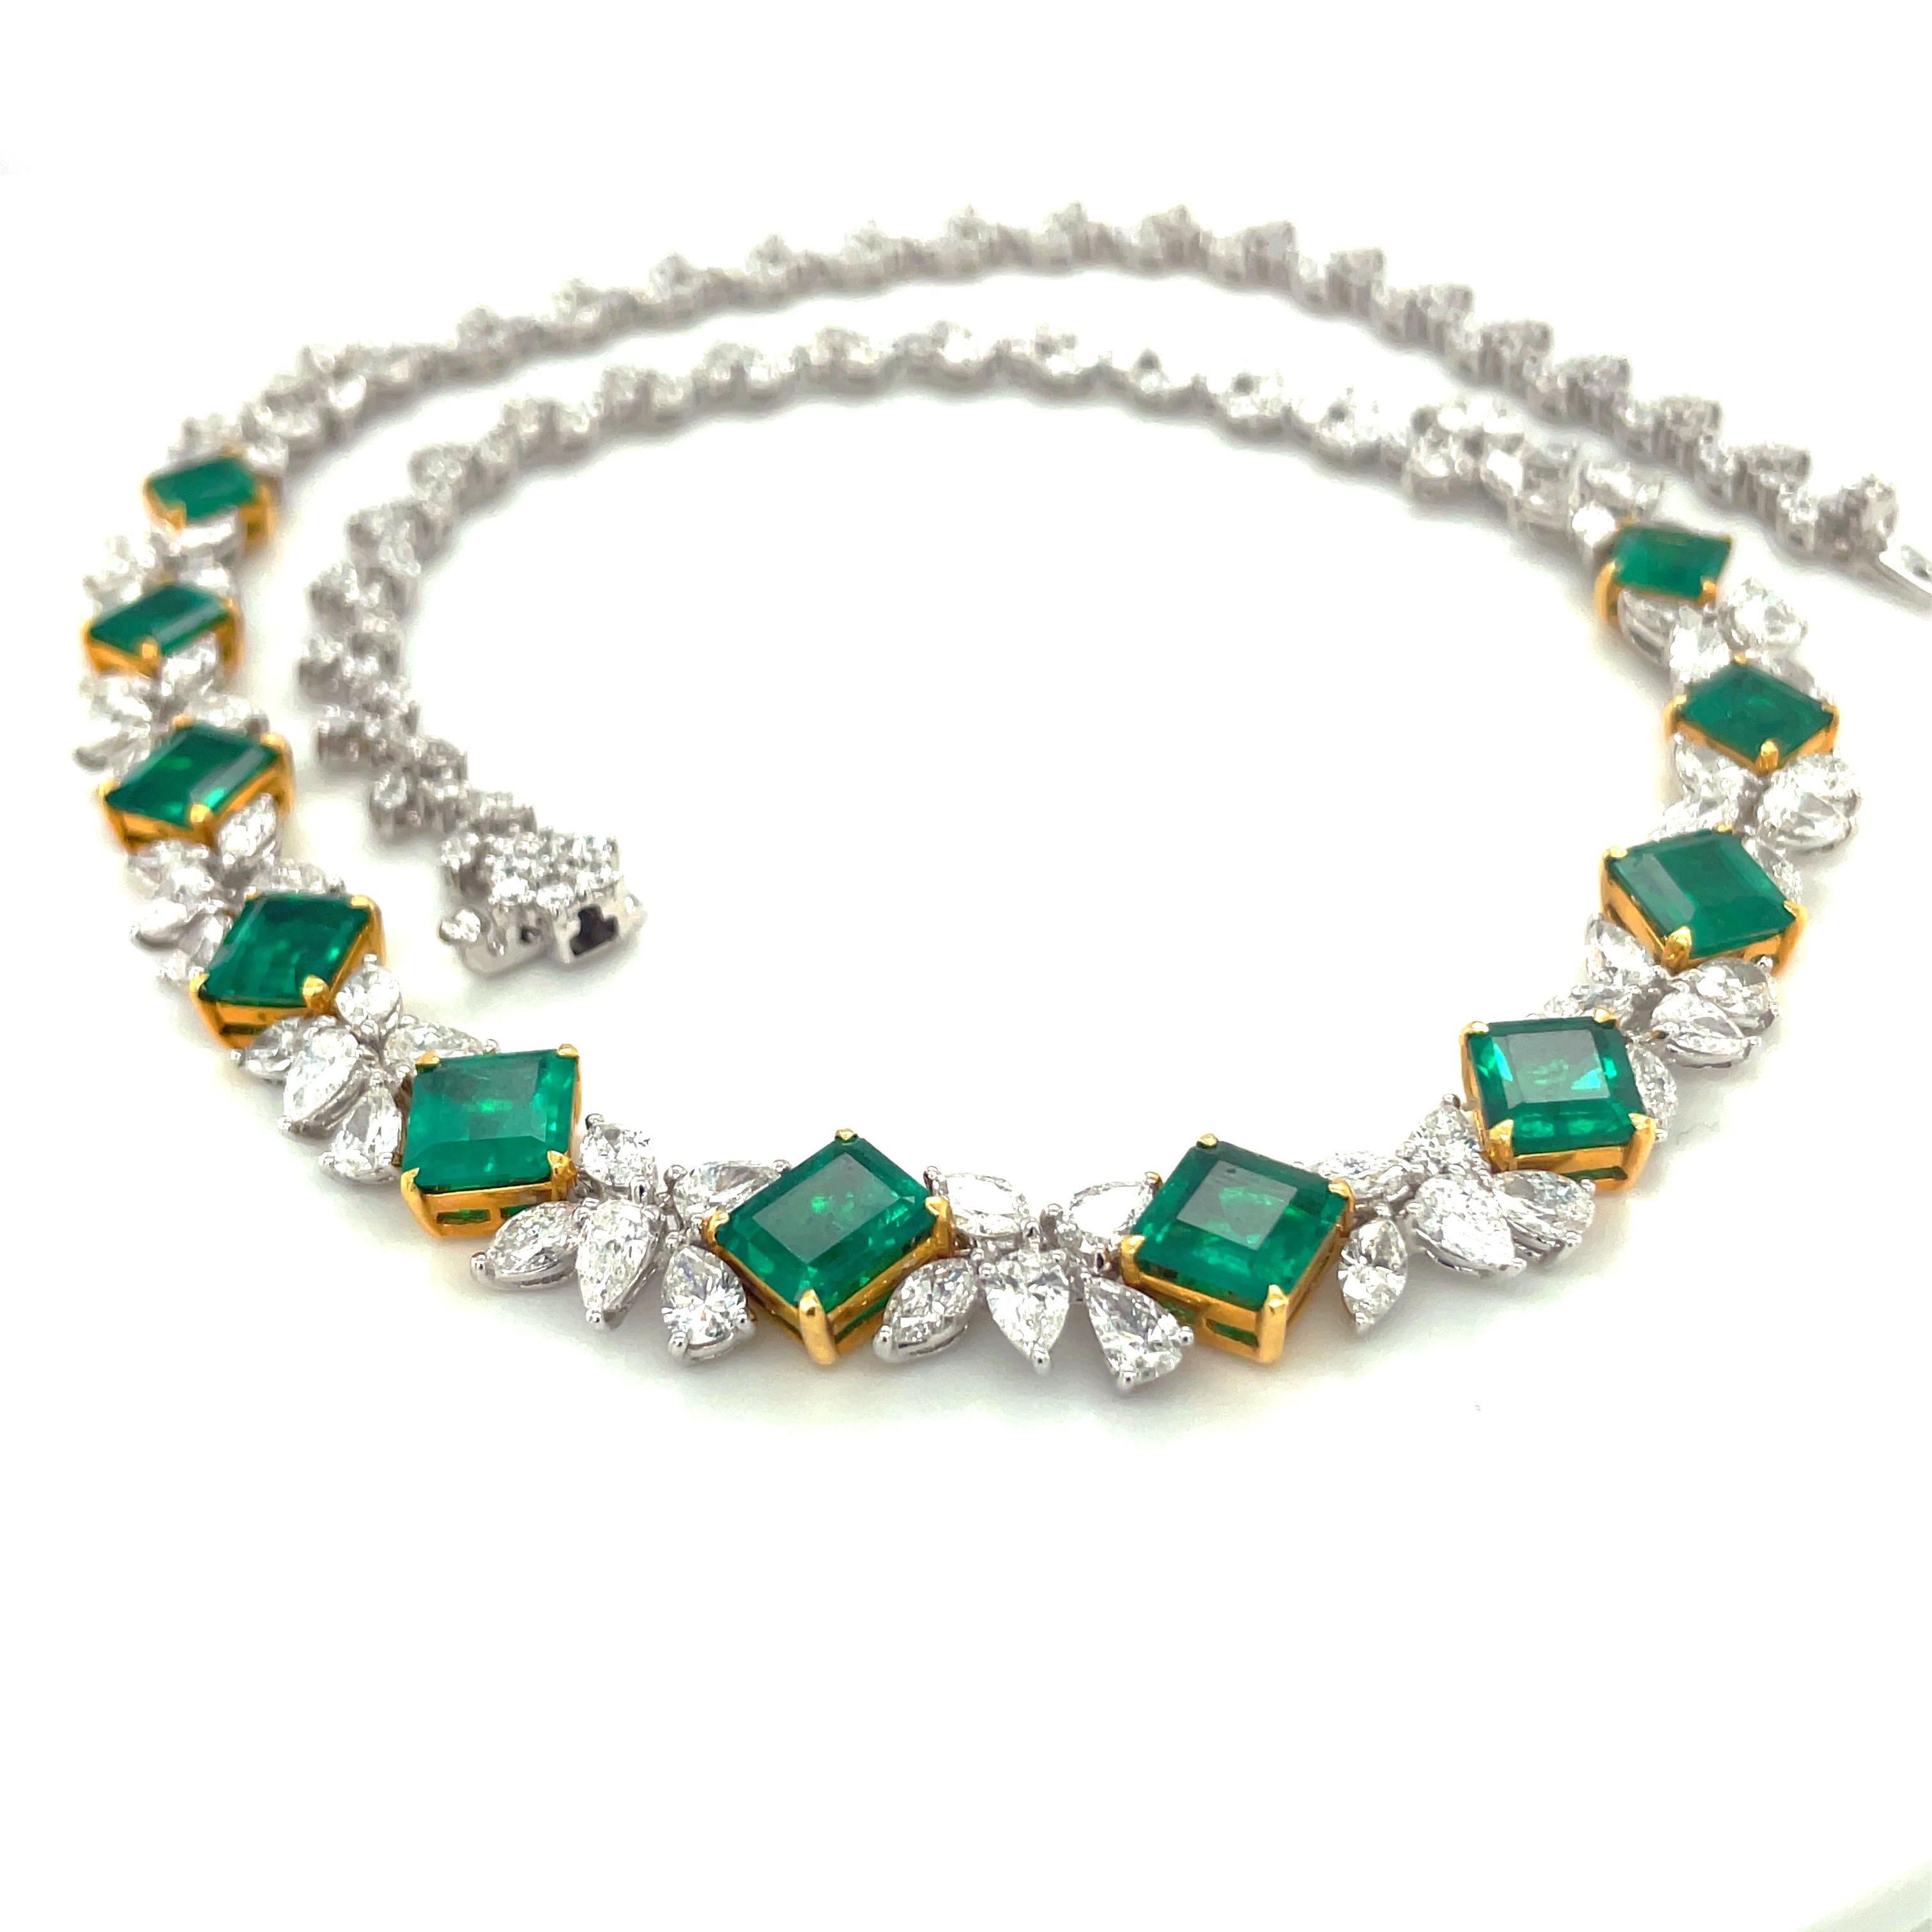 Cellini Jewelers 18KT White/Yellow Gold 12.33Ct Emerald 13.68Ct Diamond Necklace For Sale 1